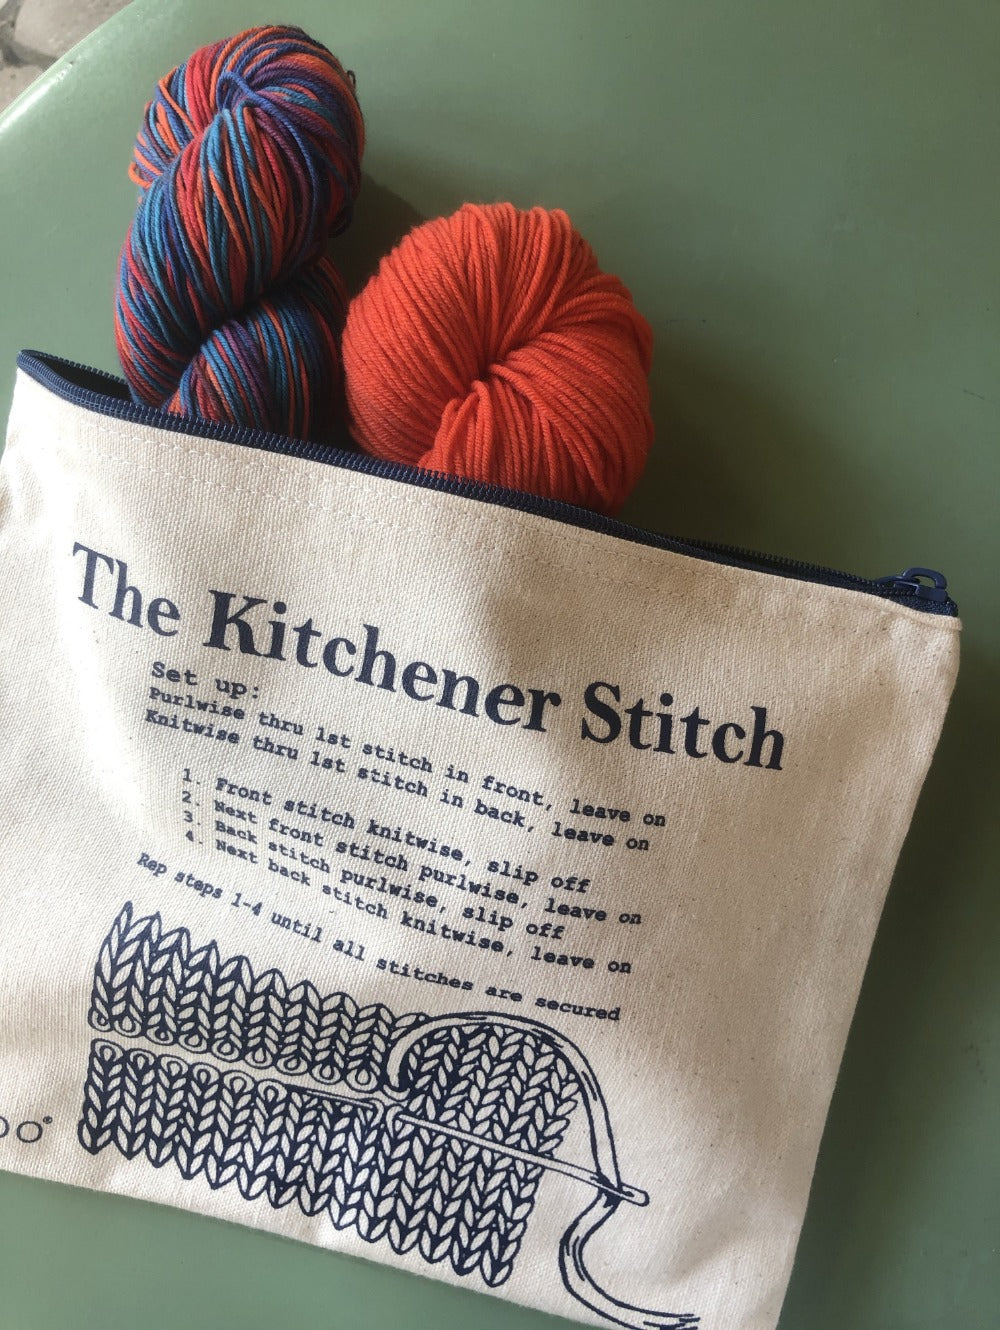 The kitchener stitch project bag